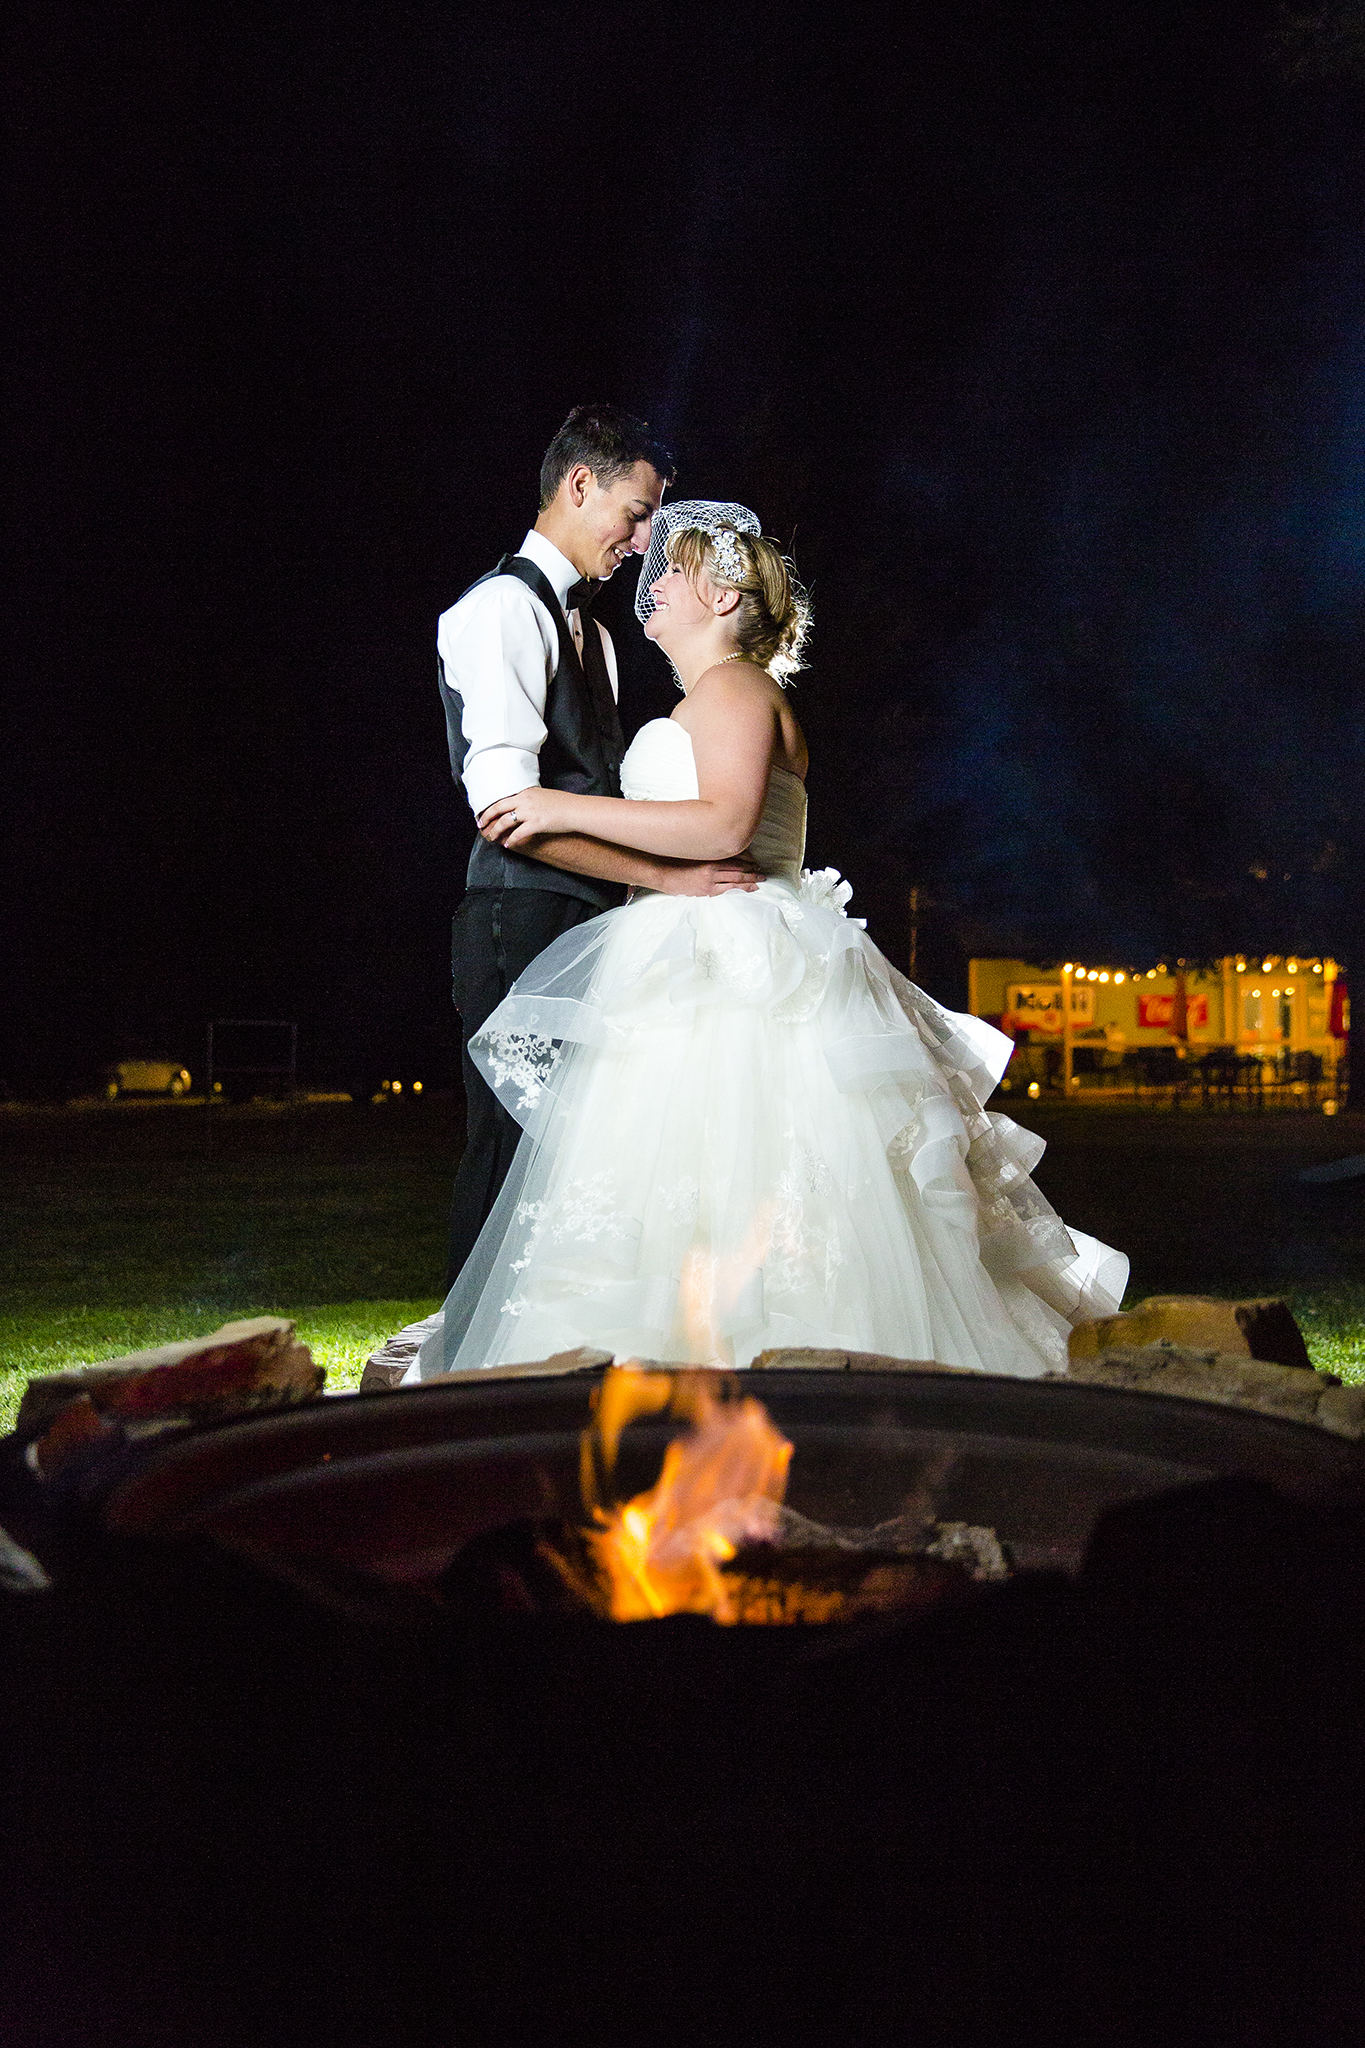 Fire Pit, Bride and Groom, Night Portraits, Dramatic, Edgy, Creative